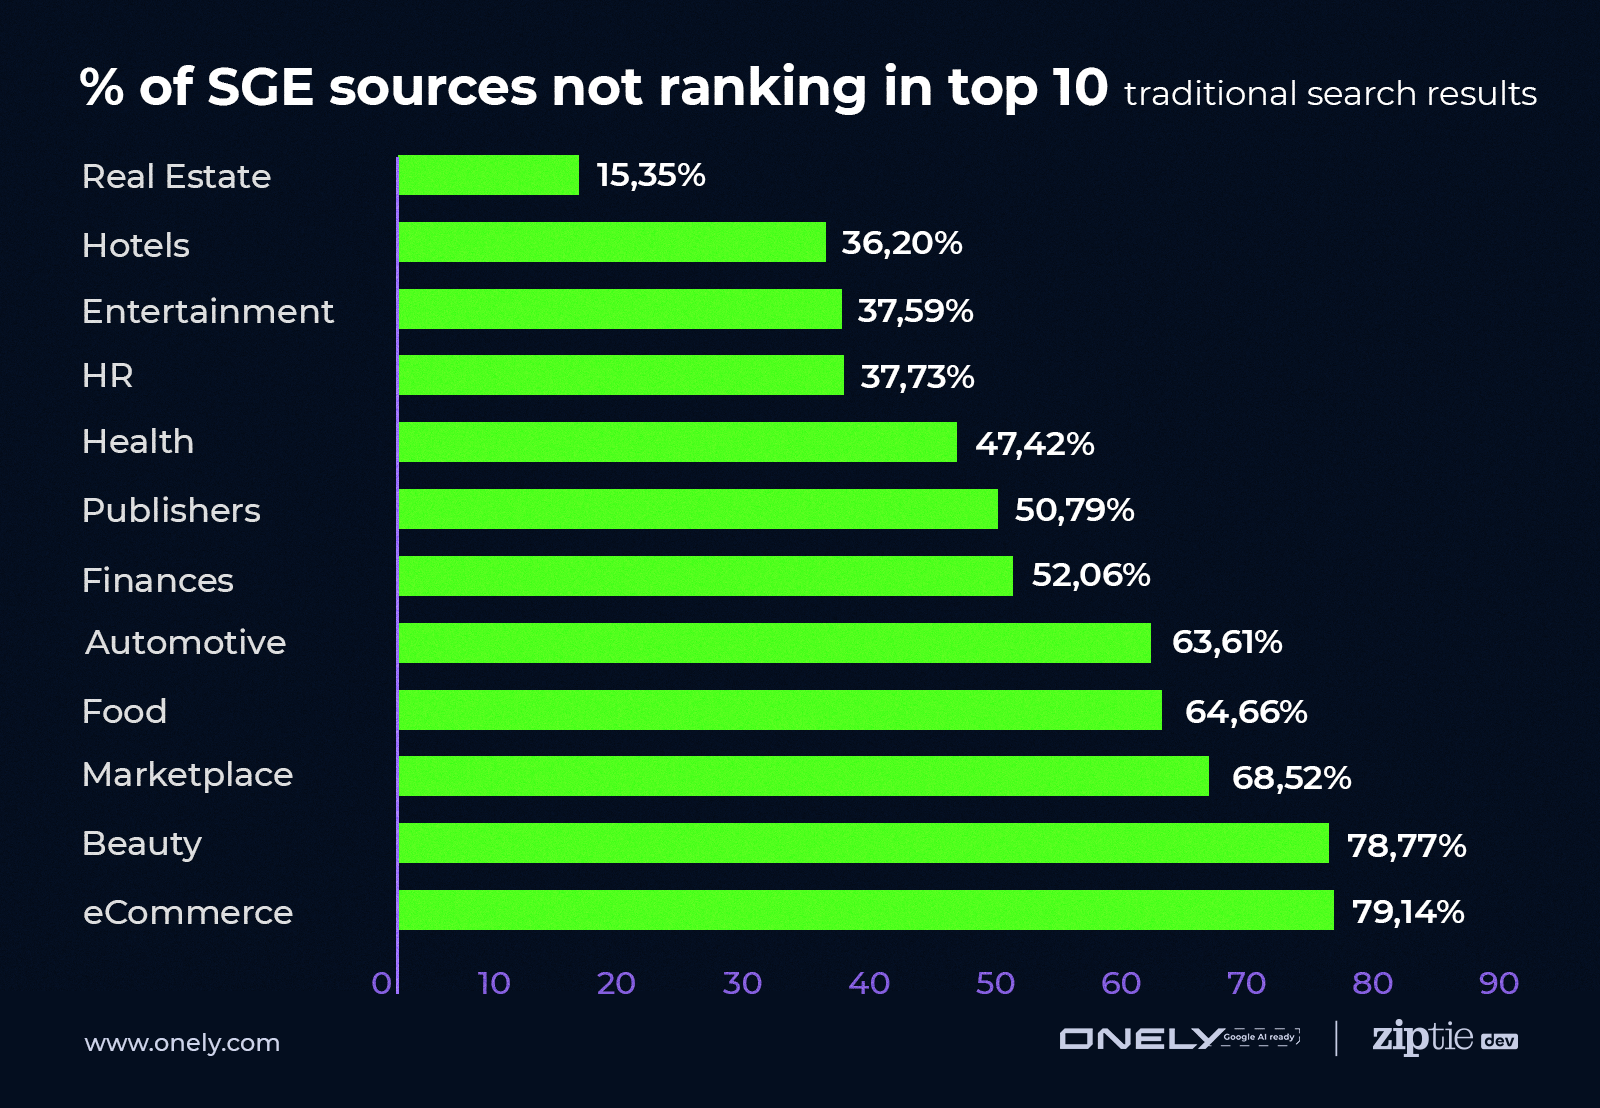 % of SGE sources not ranking in Top 10